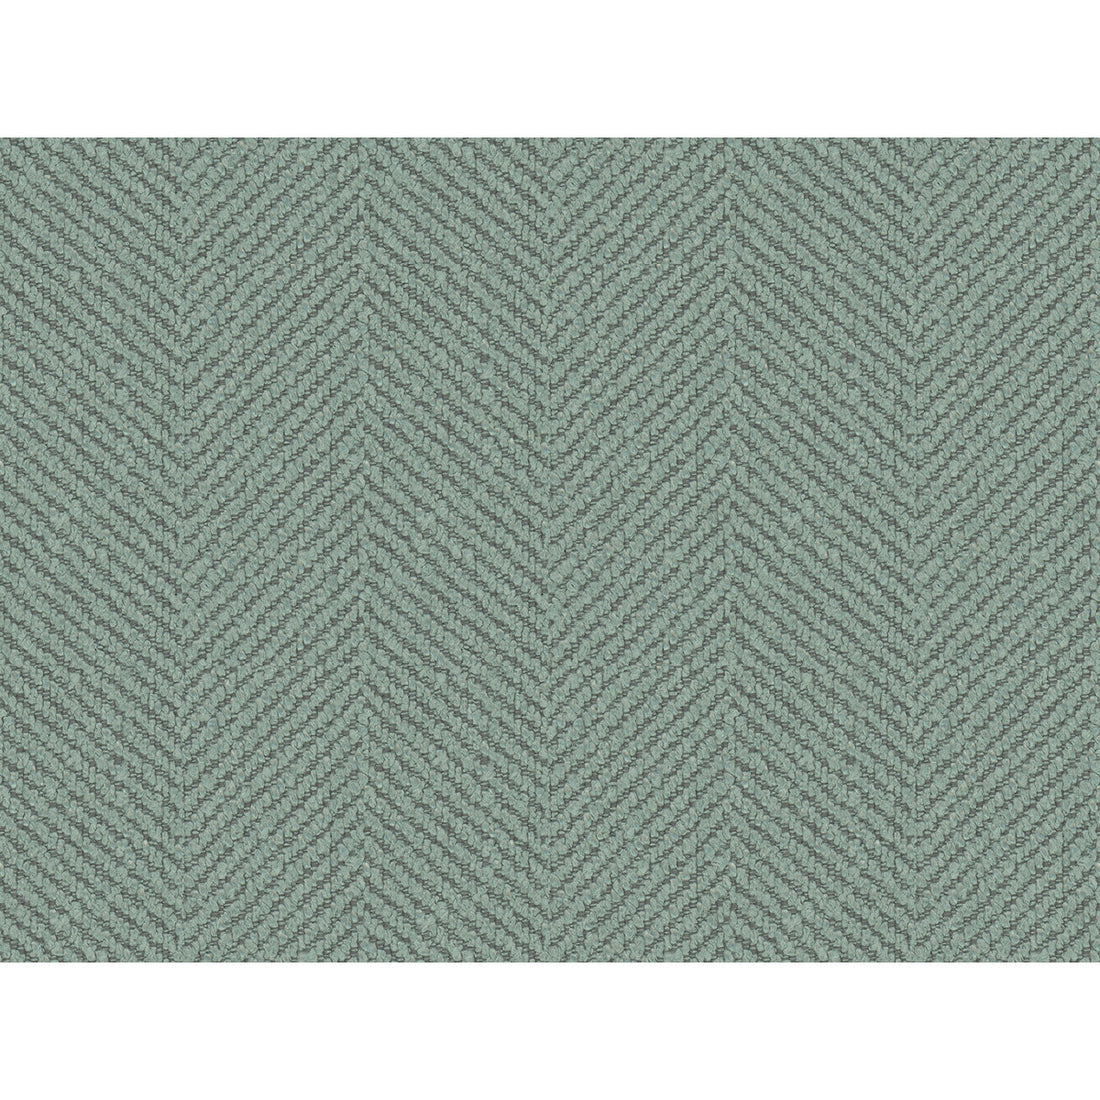 Kravet Smart fabric in 34631-113 color - pattern 34631.113.0 - by Kravet Smart in the Performance Crypton Home collection